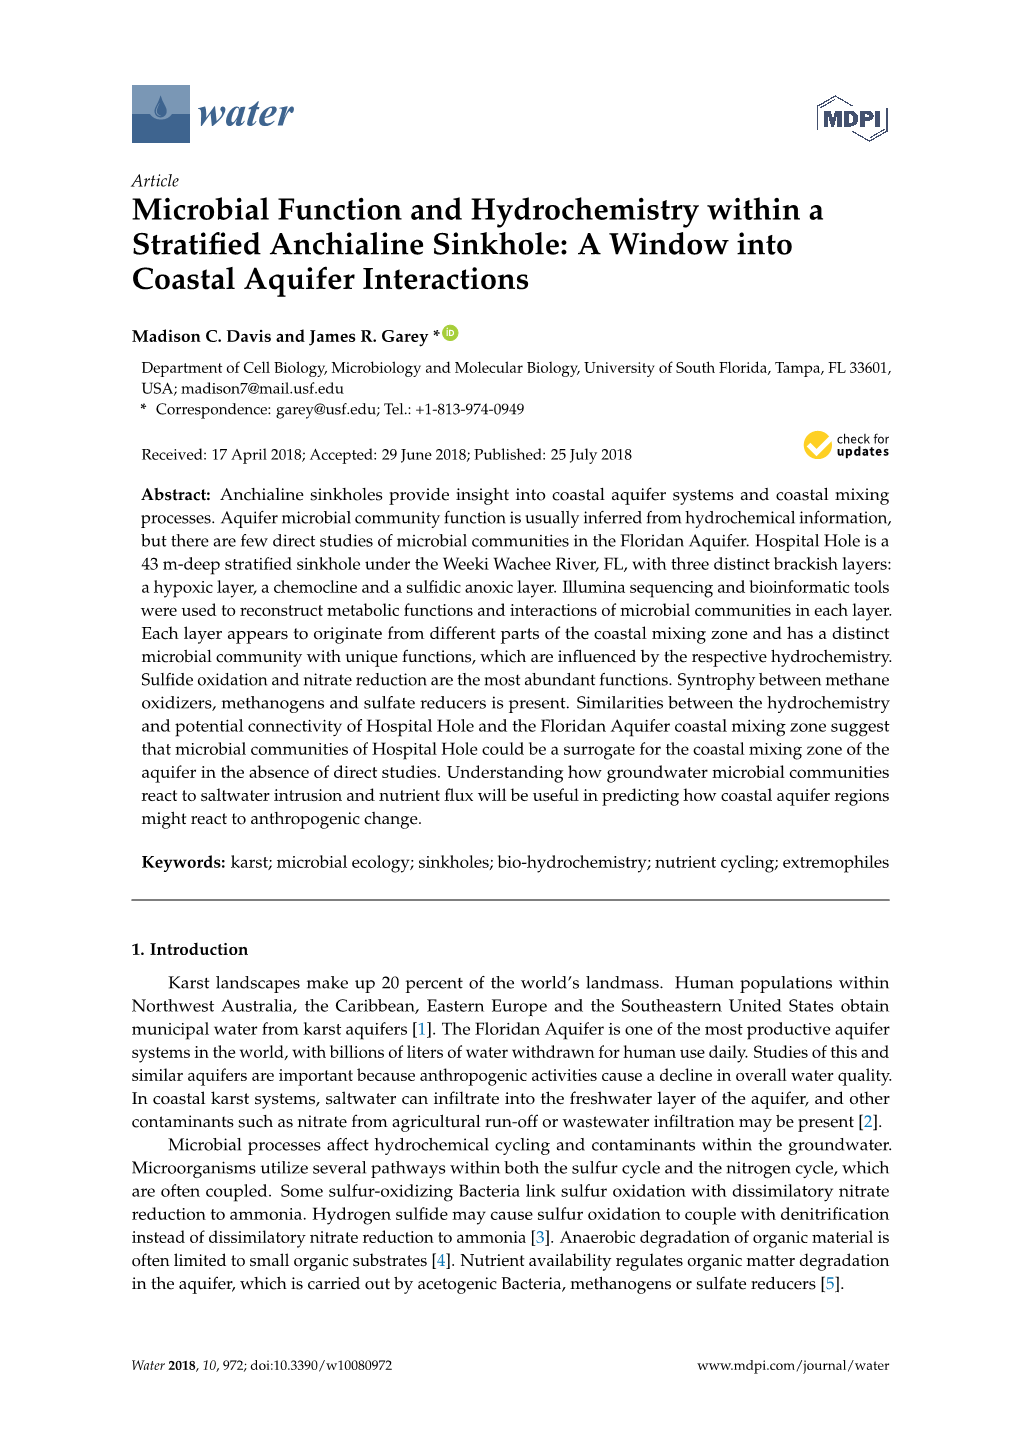 Microbial Function and Hydrochemistry Within a Stratiﬁed Anchialine Sinkhole: a Window Into Coastal Aquifer Interactions